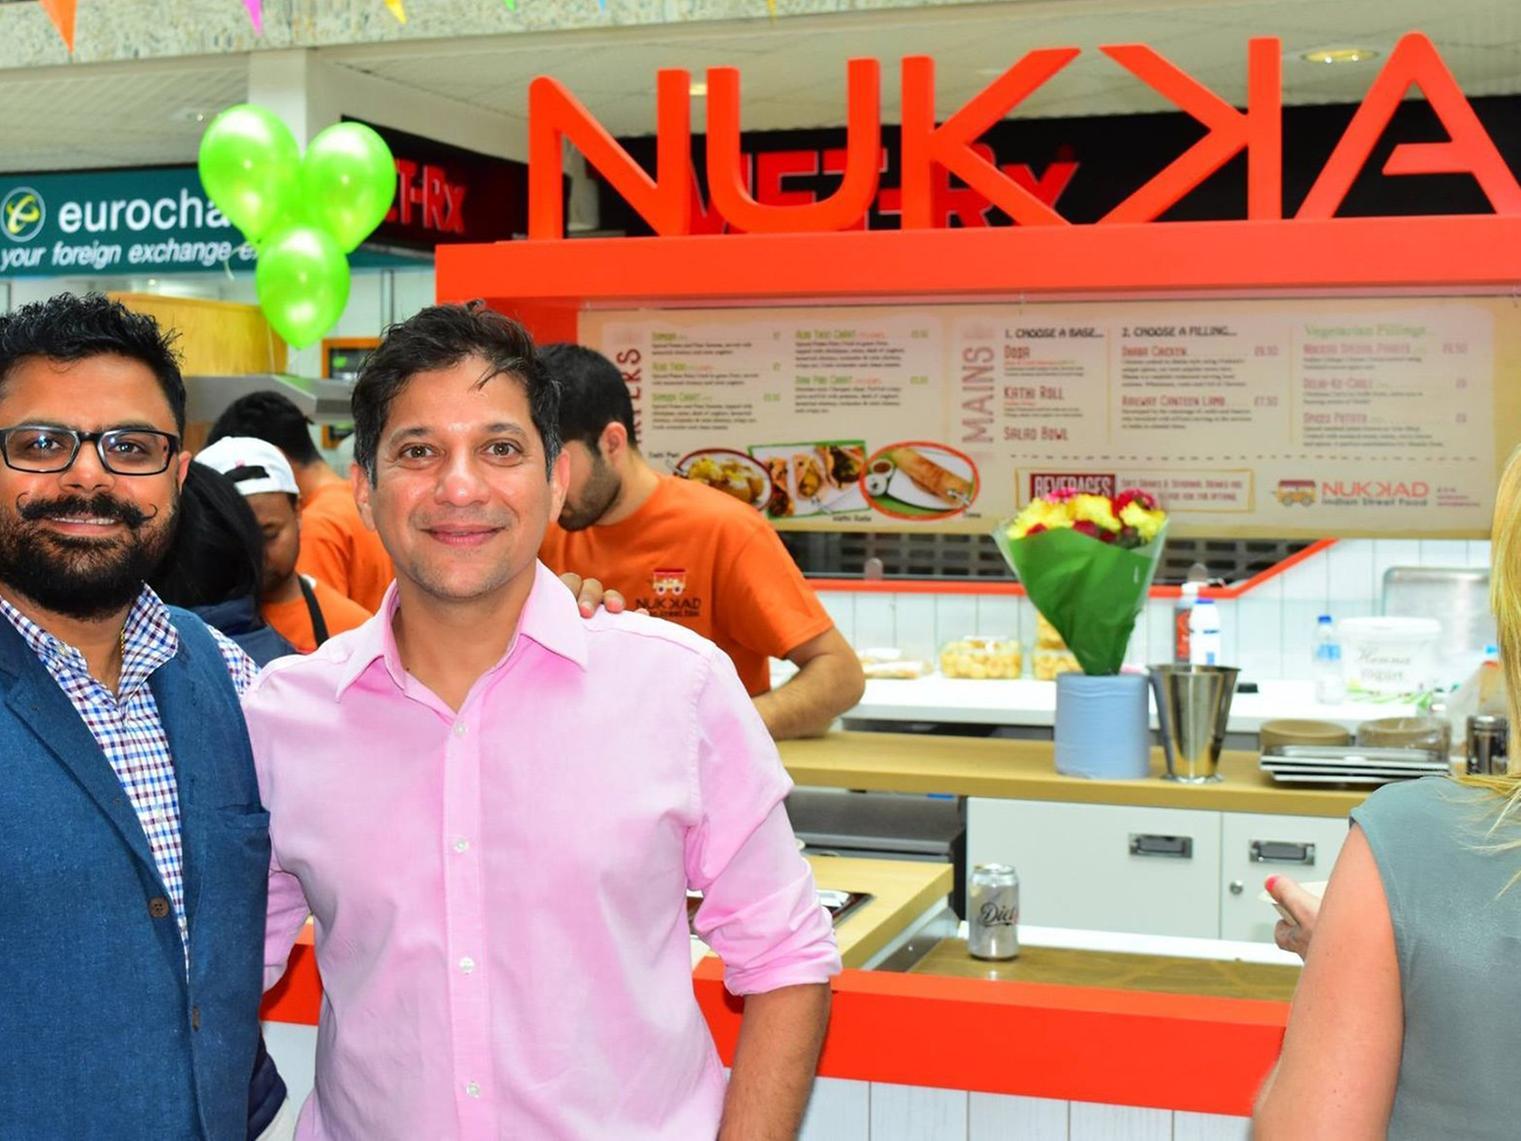 Abhi Khurana, pictured with friend Amol Kapote, said he struggled to find genuine Indian street food as Leeds student - then Nukkad opened in the Merrion centre, selling dosa and authentic Indian flavours